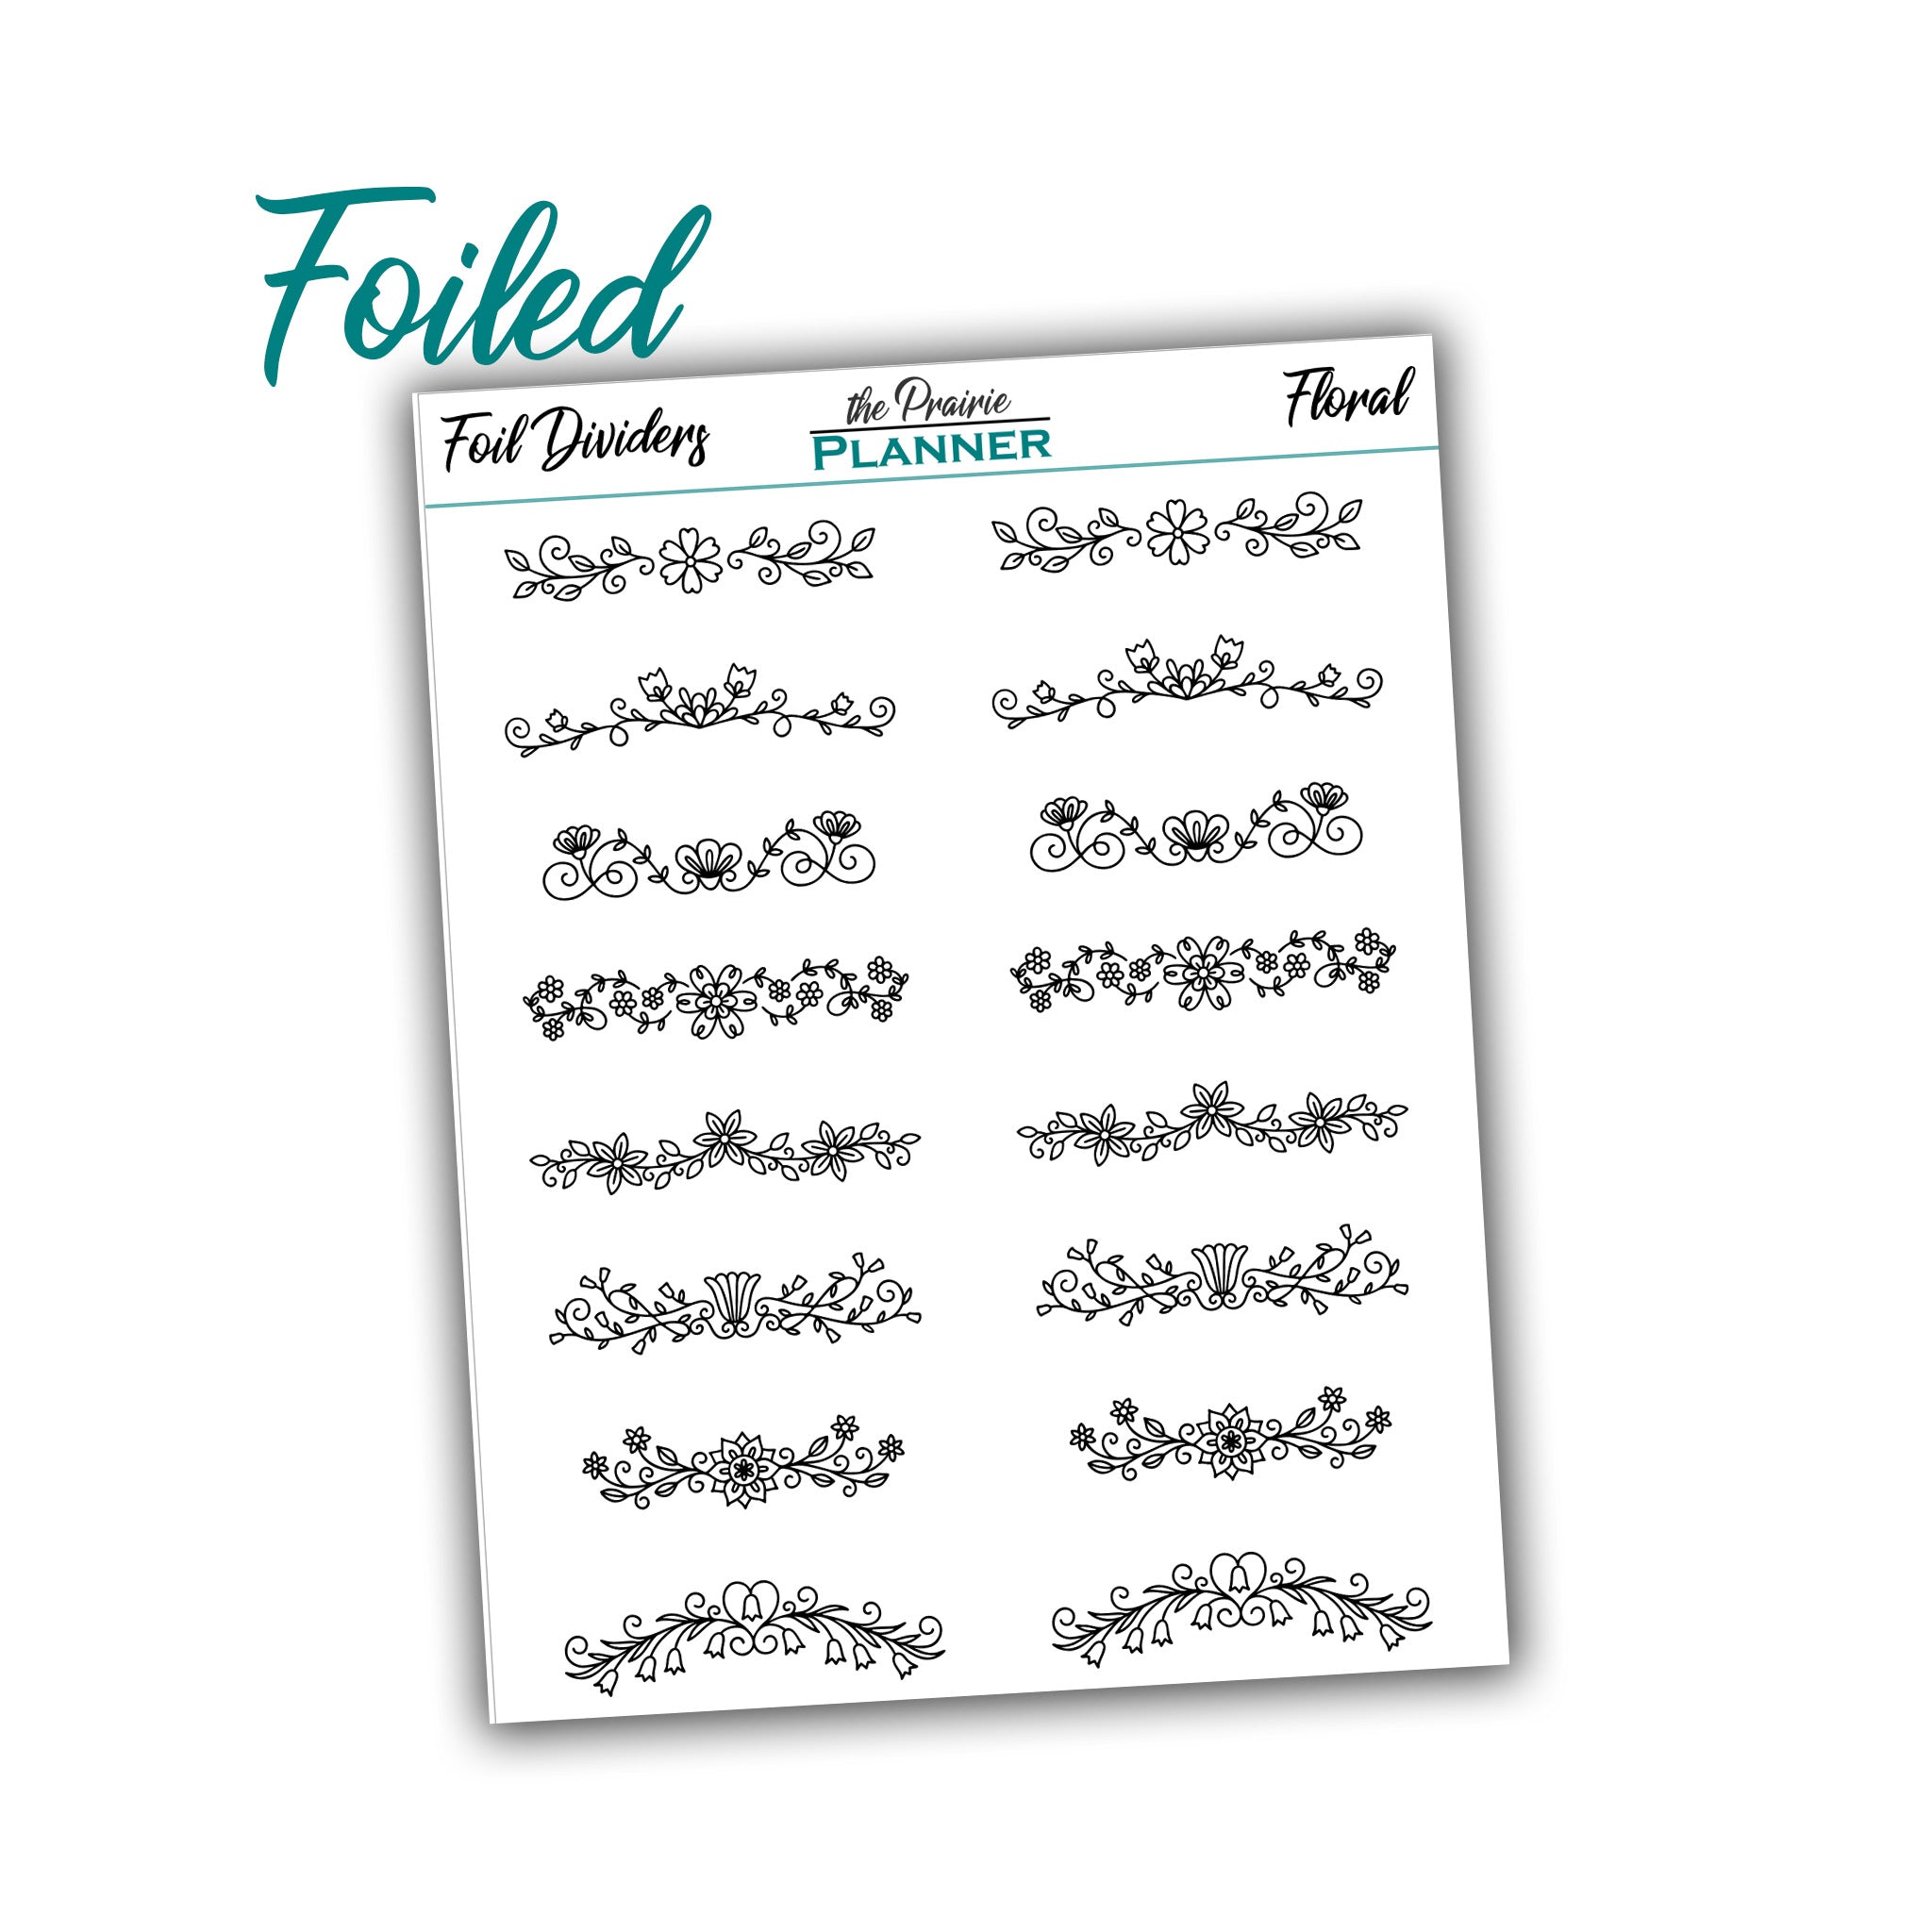 FOIL DIVIDERS - Floral - Overlay - Planner Stickers